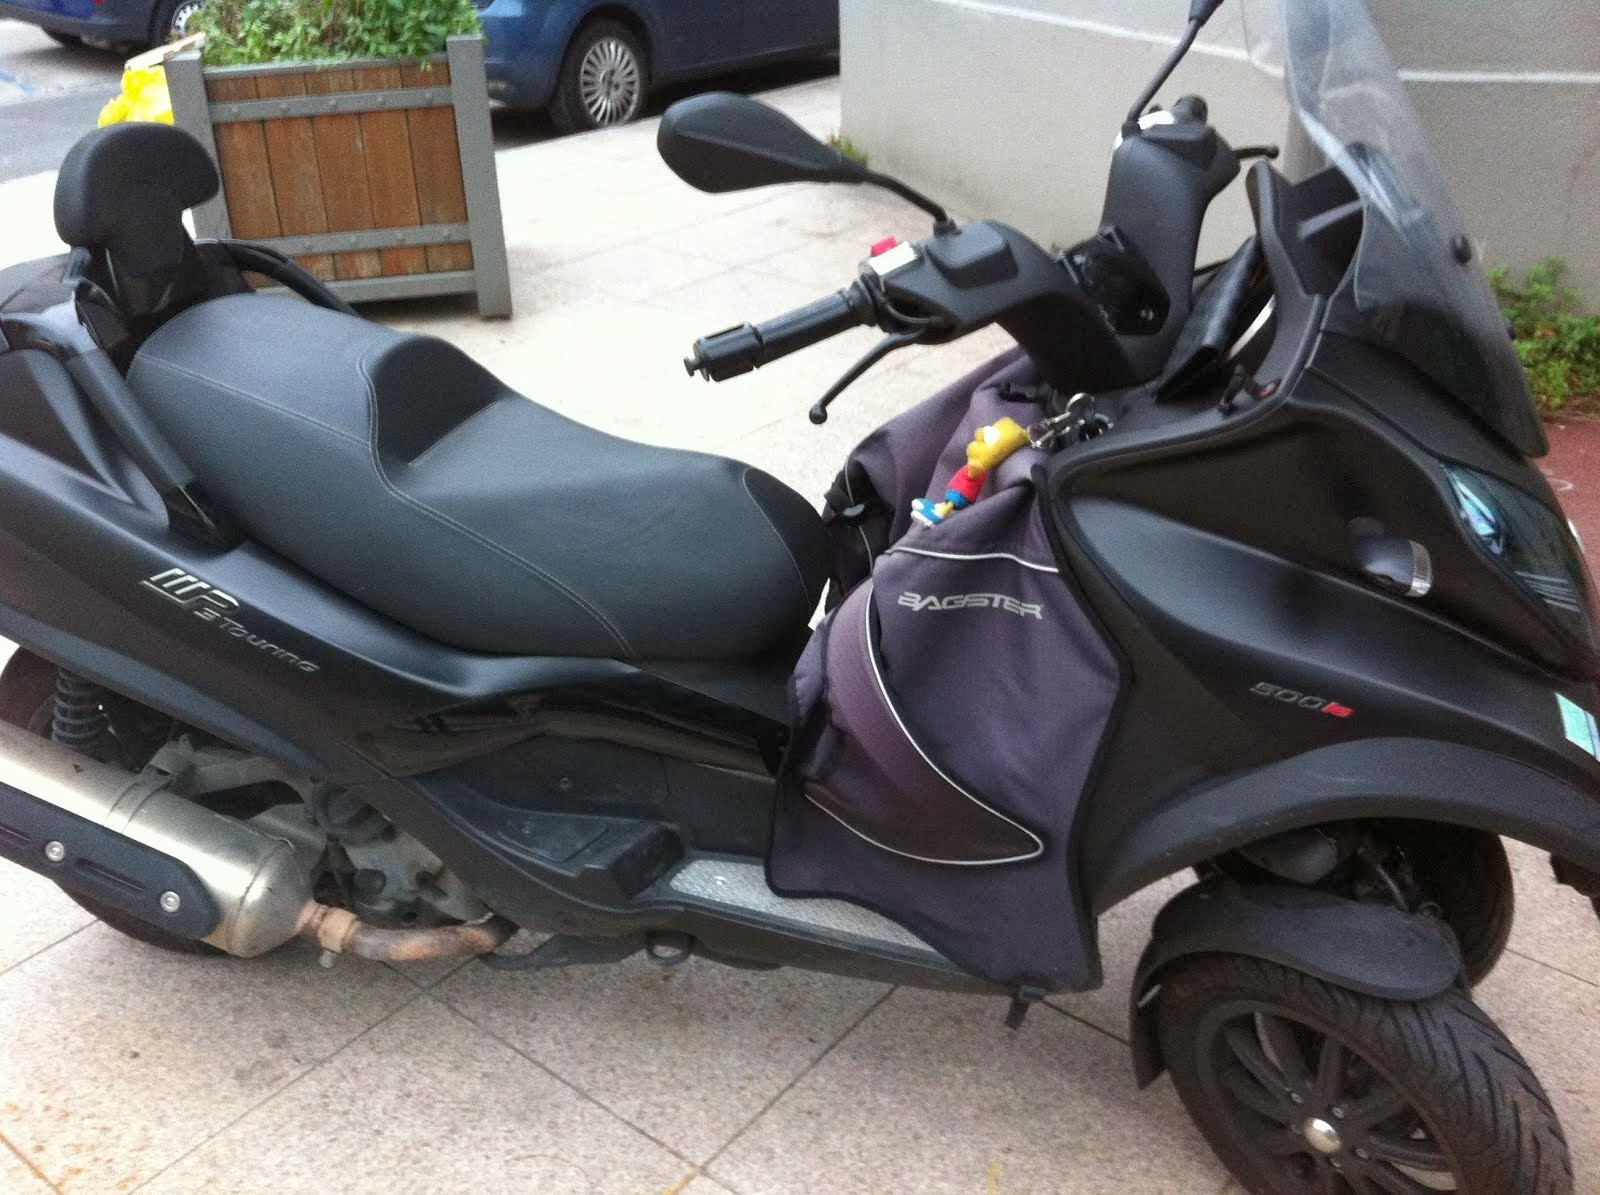 My scooter mp3 500 Lt